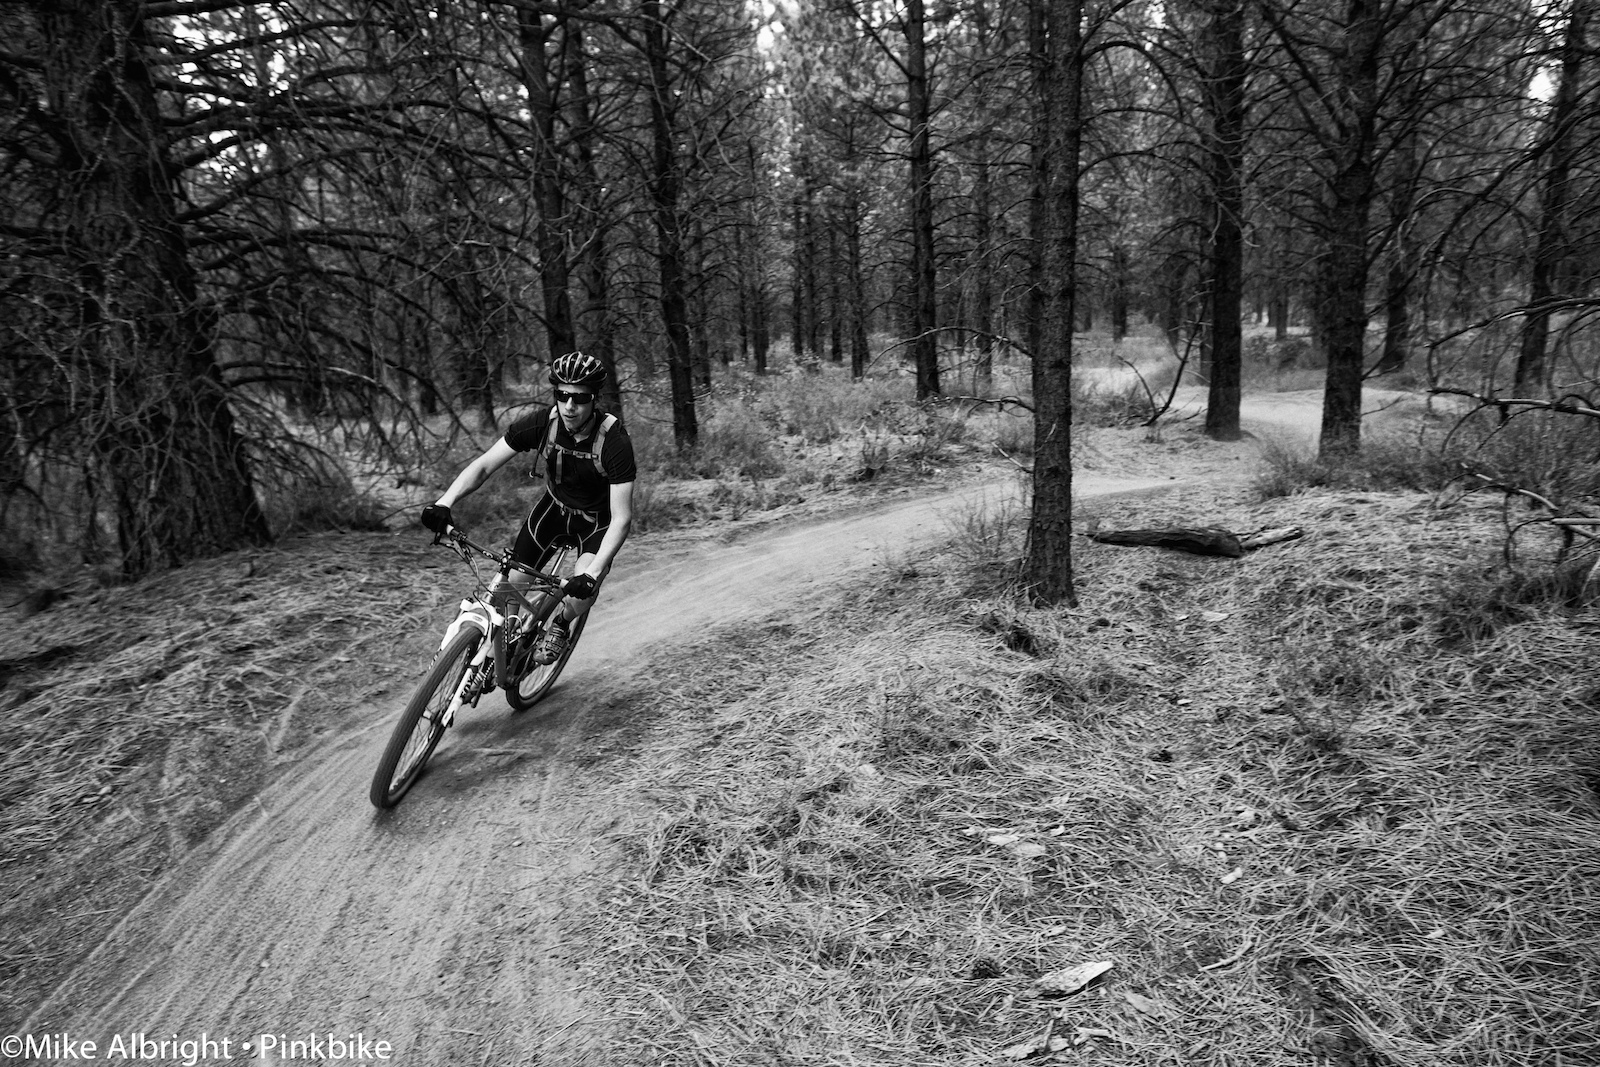 Friday "Happy Hour" at the Lower Whoops trail near Bend, Oregon.